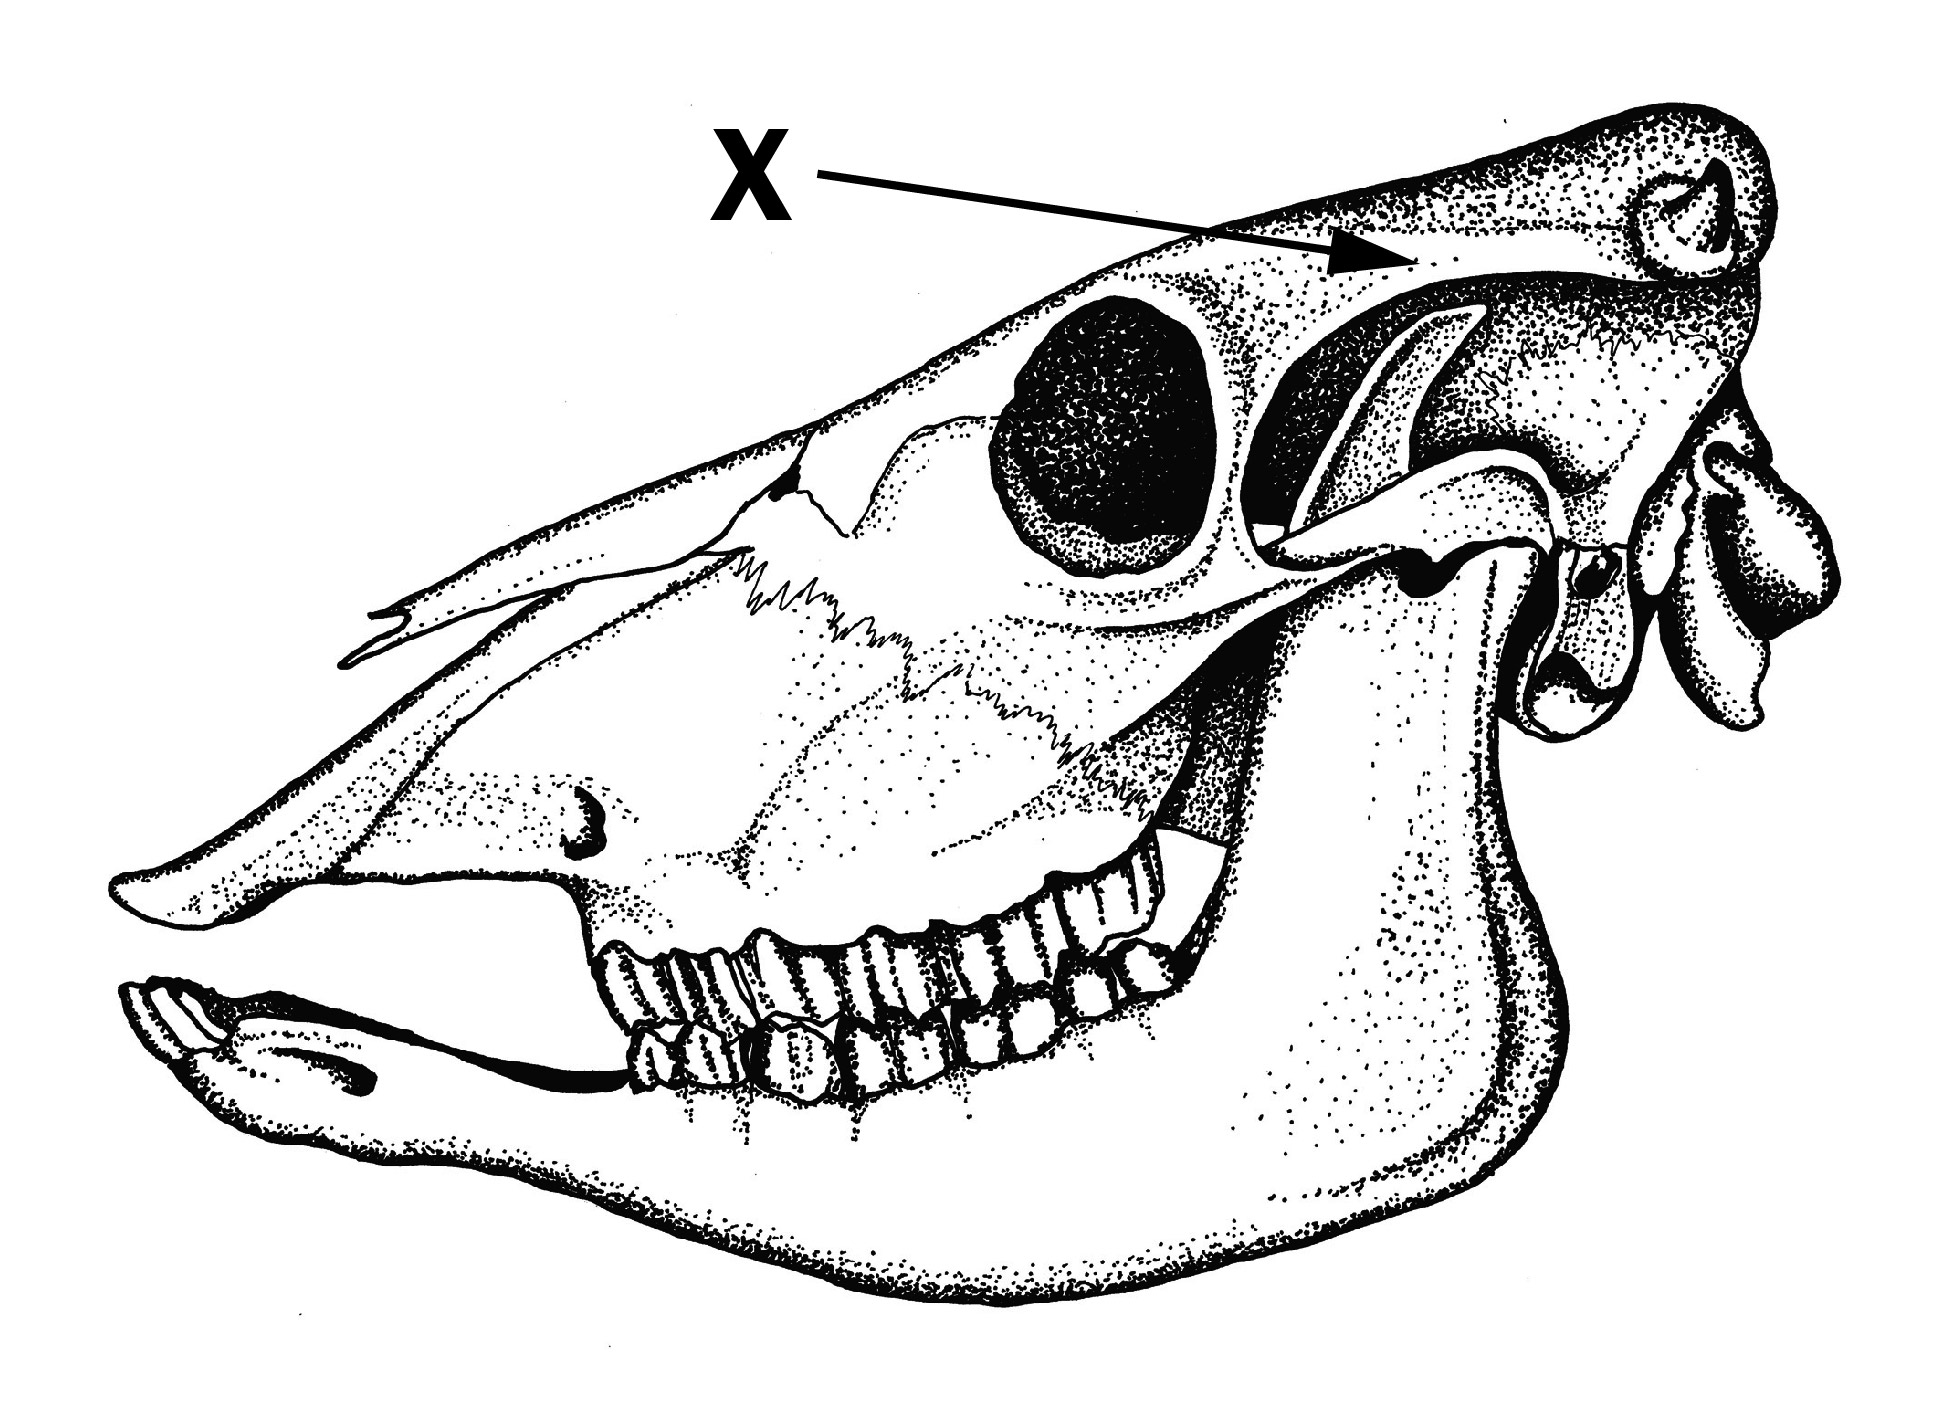 Skull with X marked